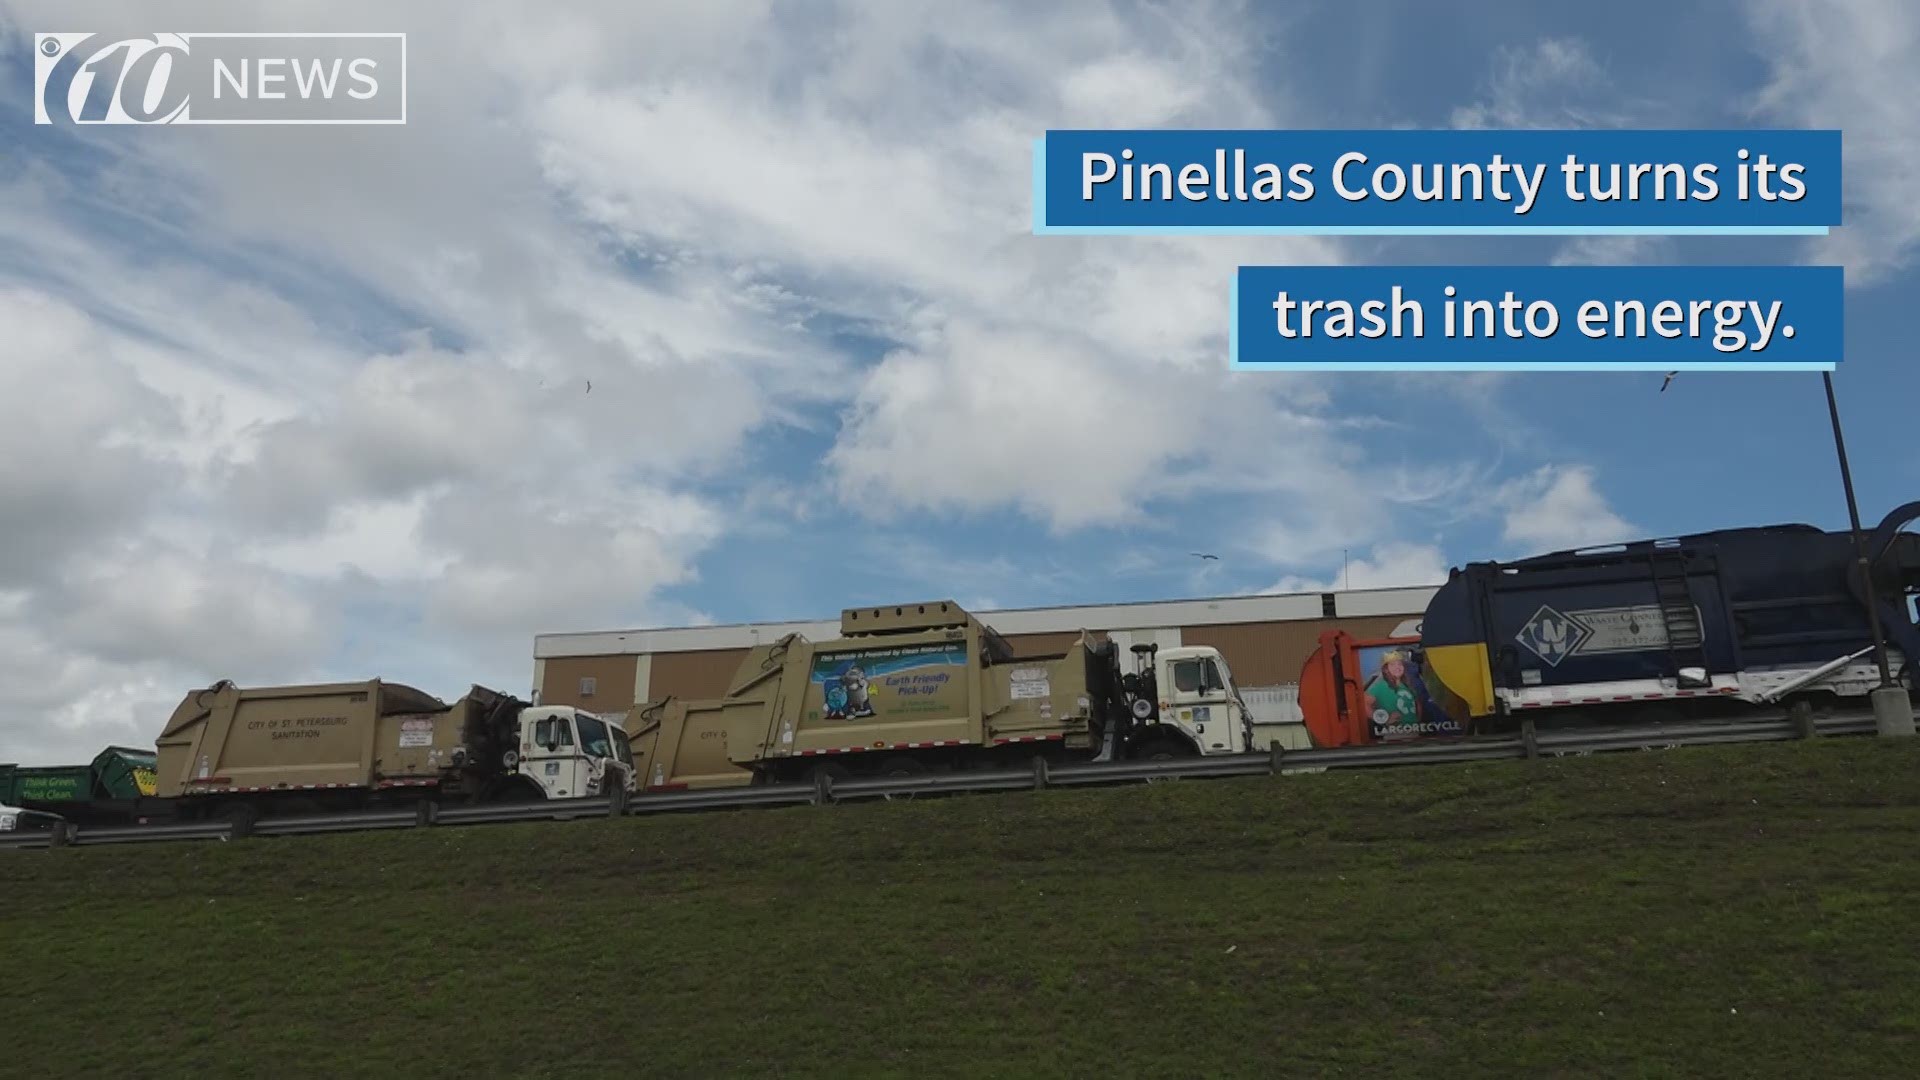 Pinellas County is able to minimize the amount of trash that goes into the landfill by 90 percent just by burning its garbage. In return, the county receives a renewable energy credit.